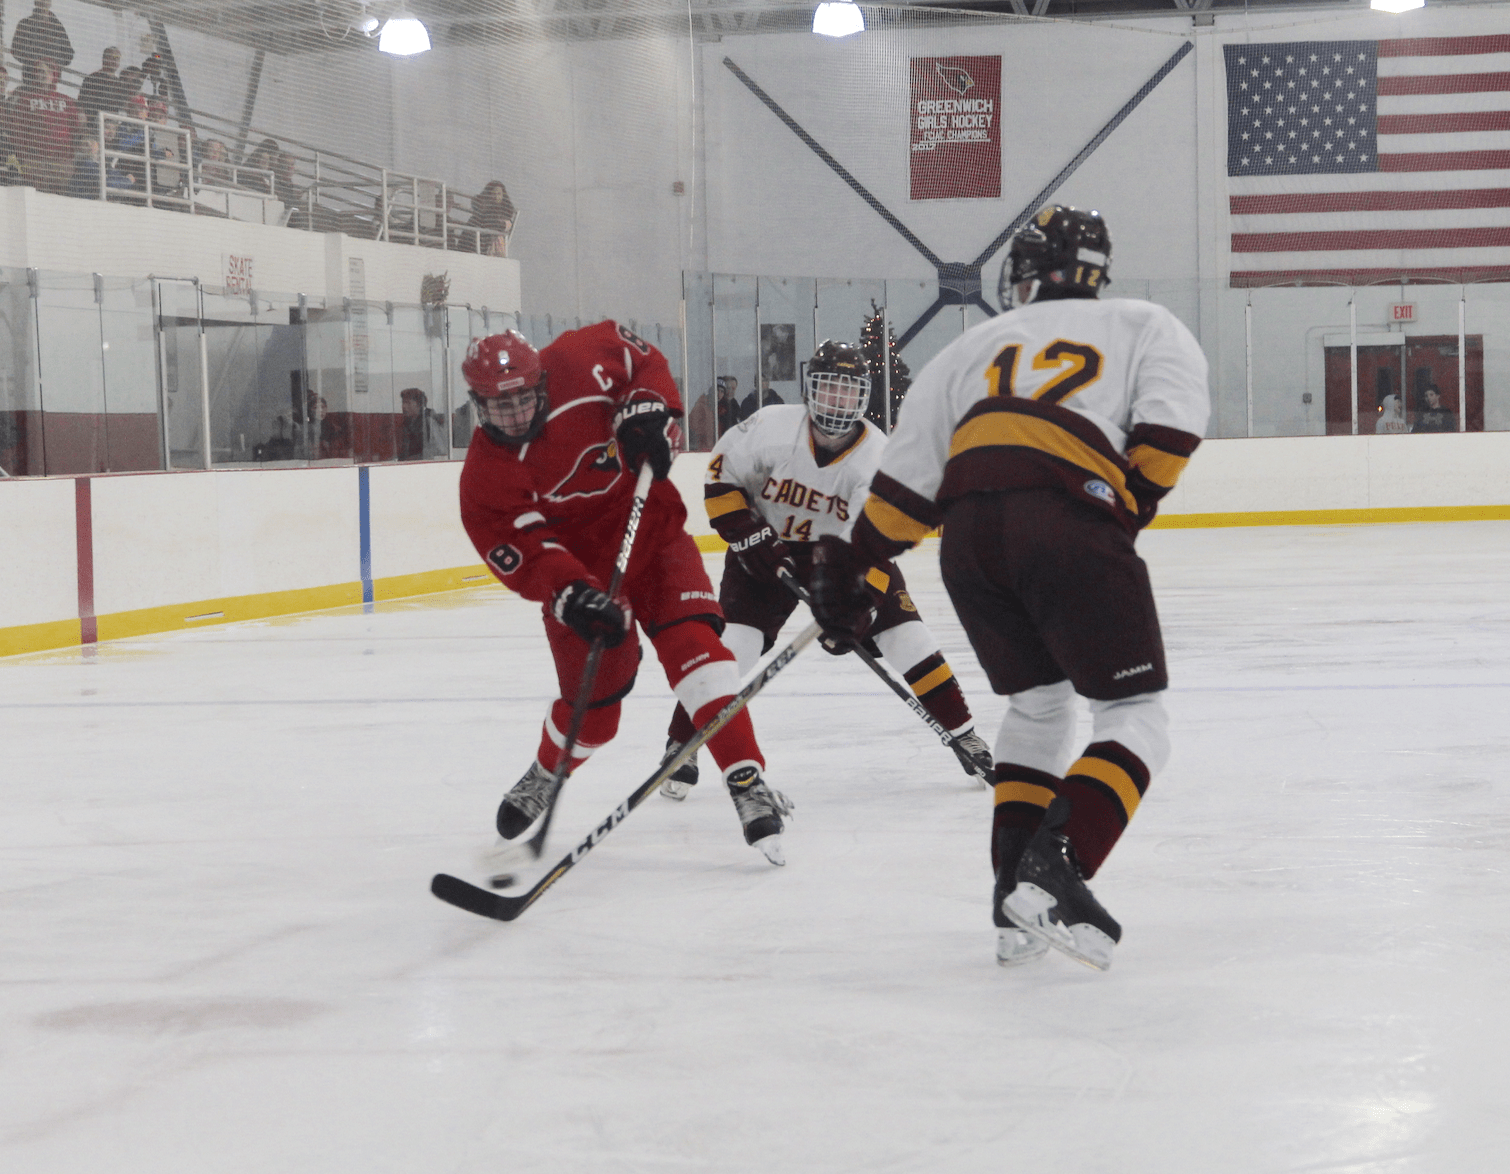 Cardinals dominated the Cadets in the season opener at Hamill Rink, Dec 16, 2017 Photo: Leslie Yager